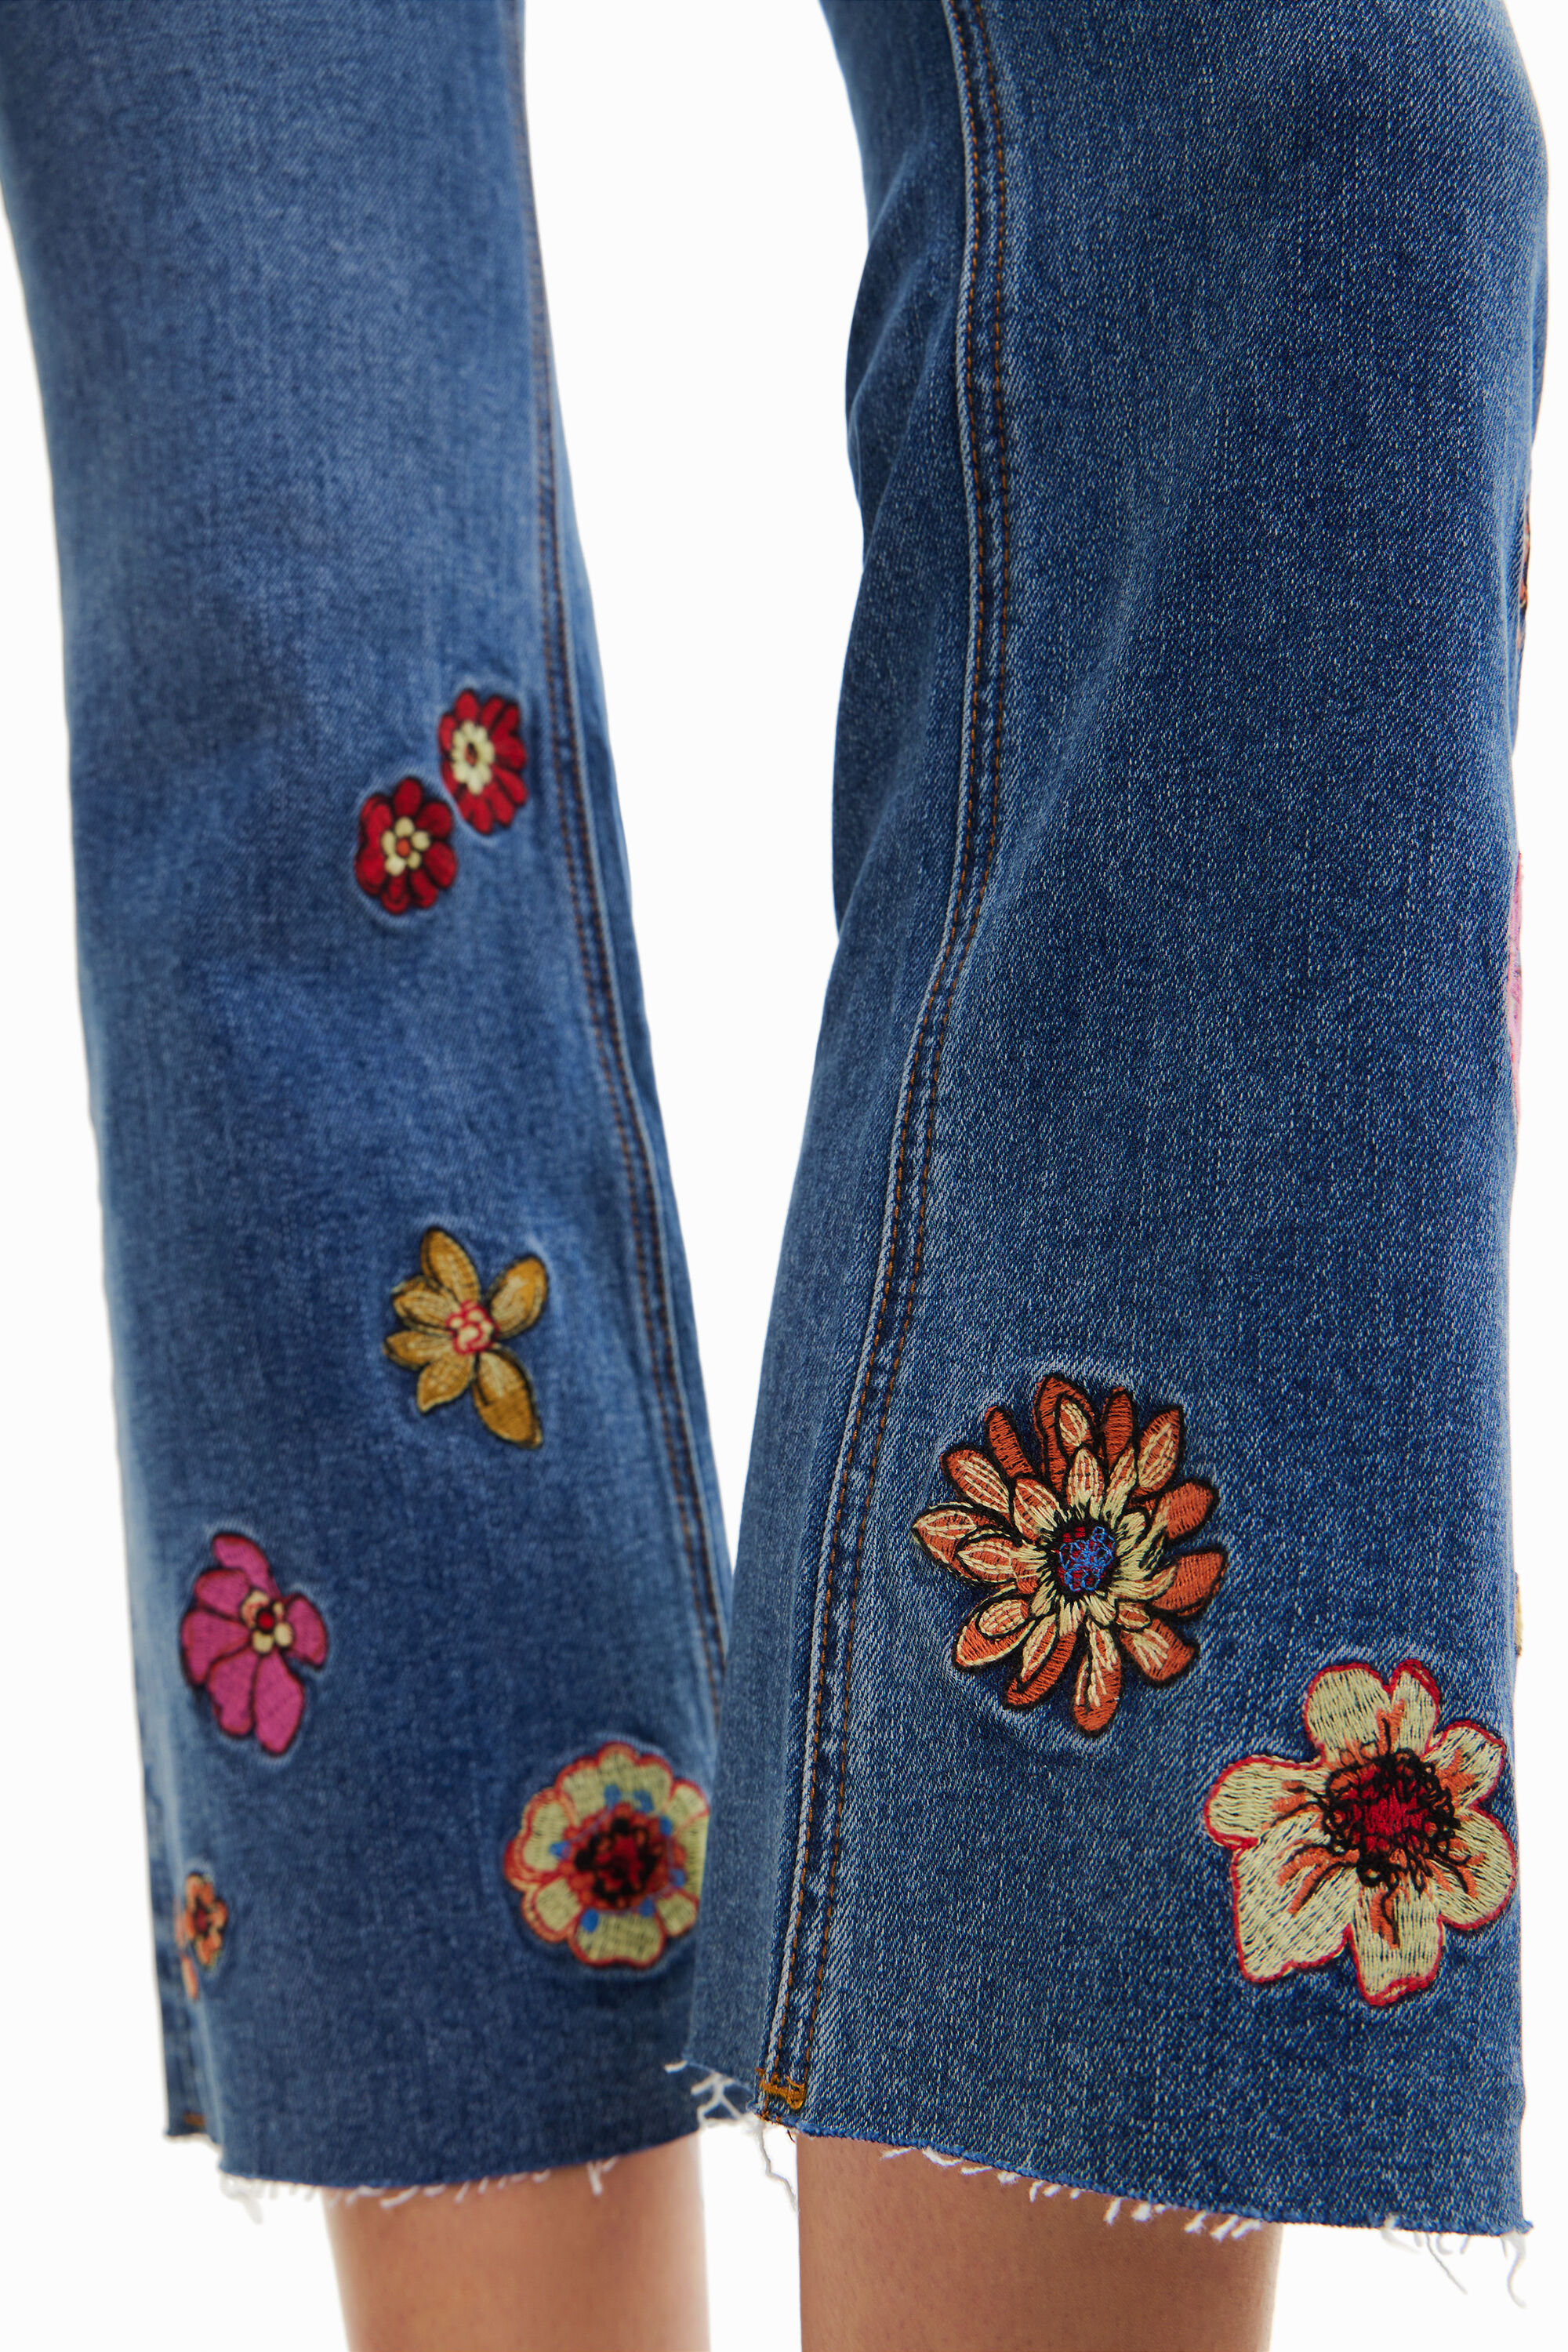 Desigual NICOLE embroidered denim jeans Summer 2023 collection now on sale at Angel in Vancouver Canada